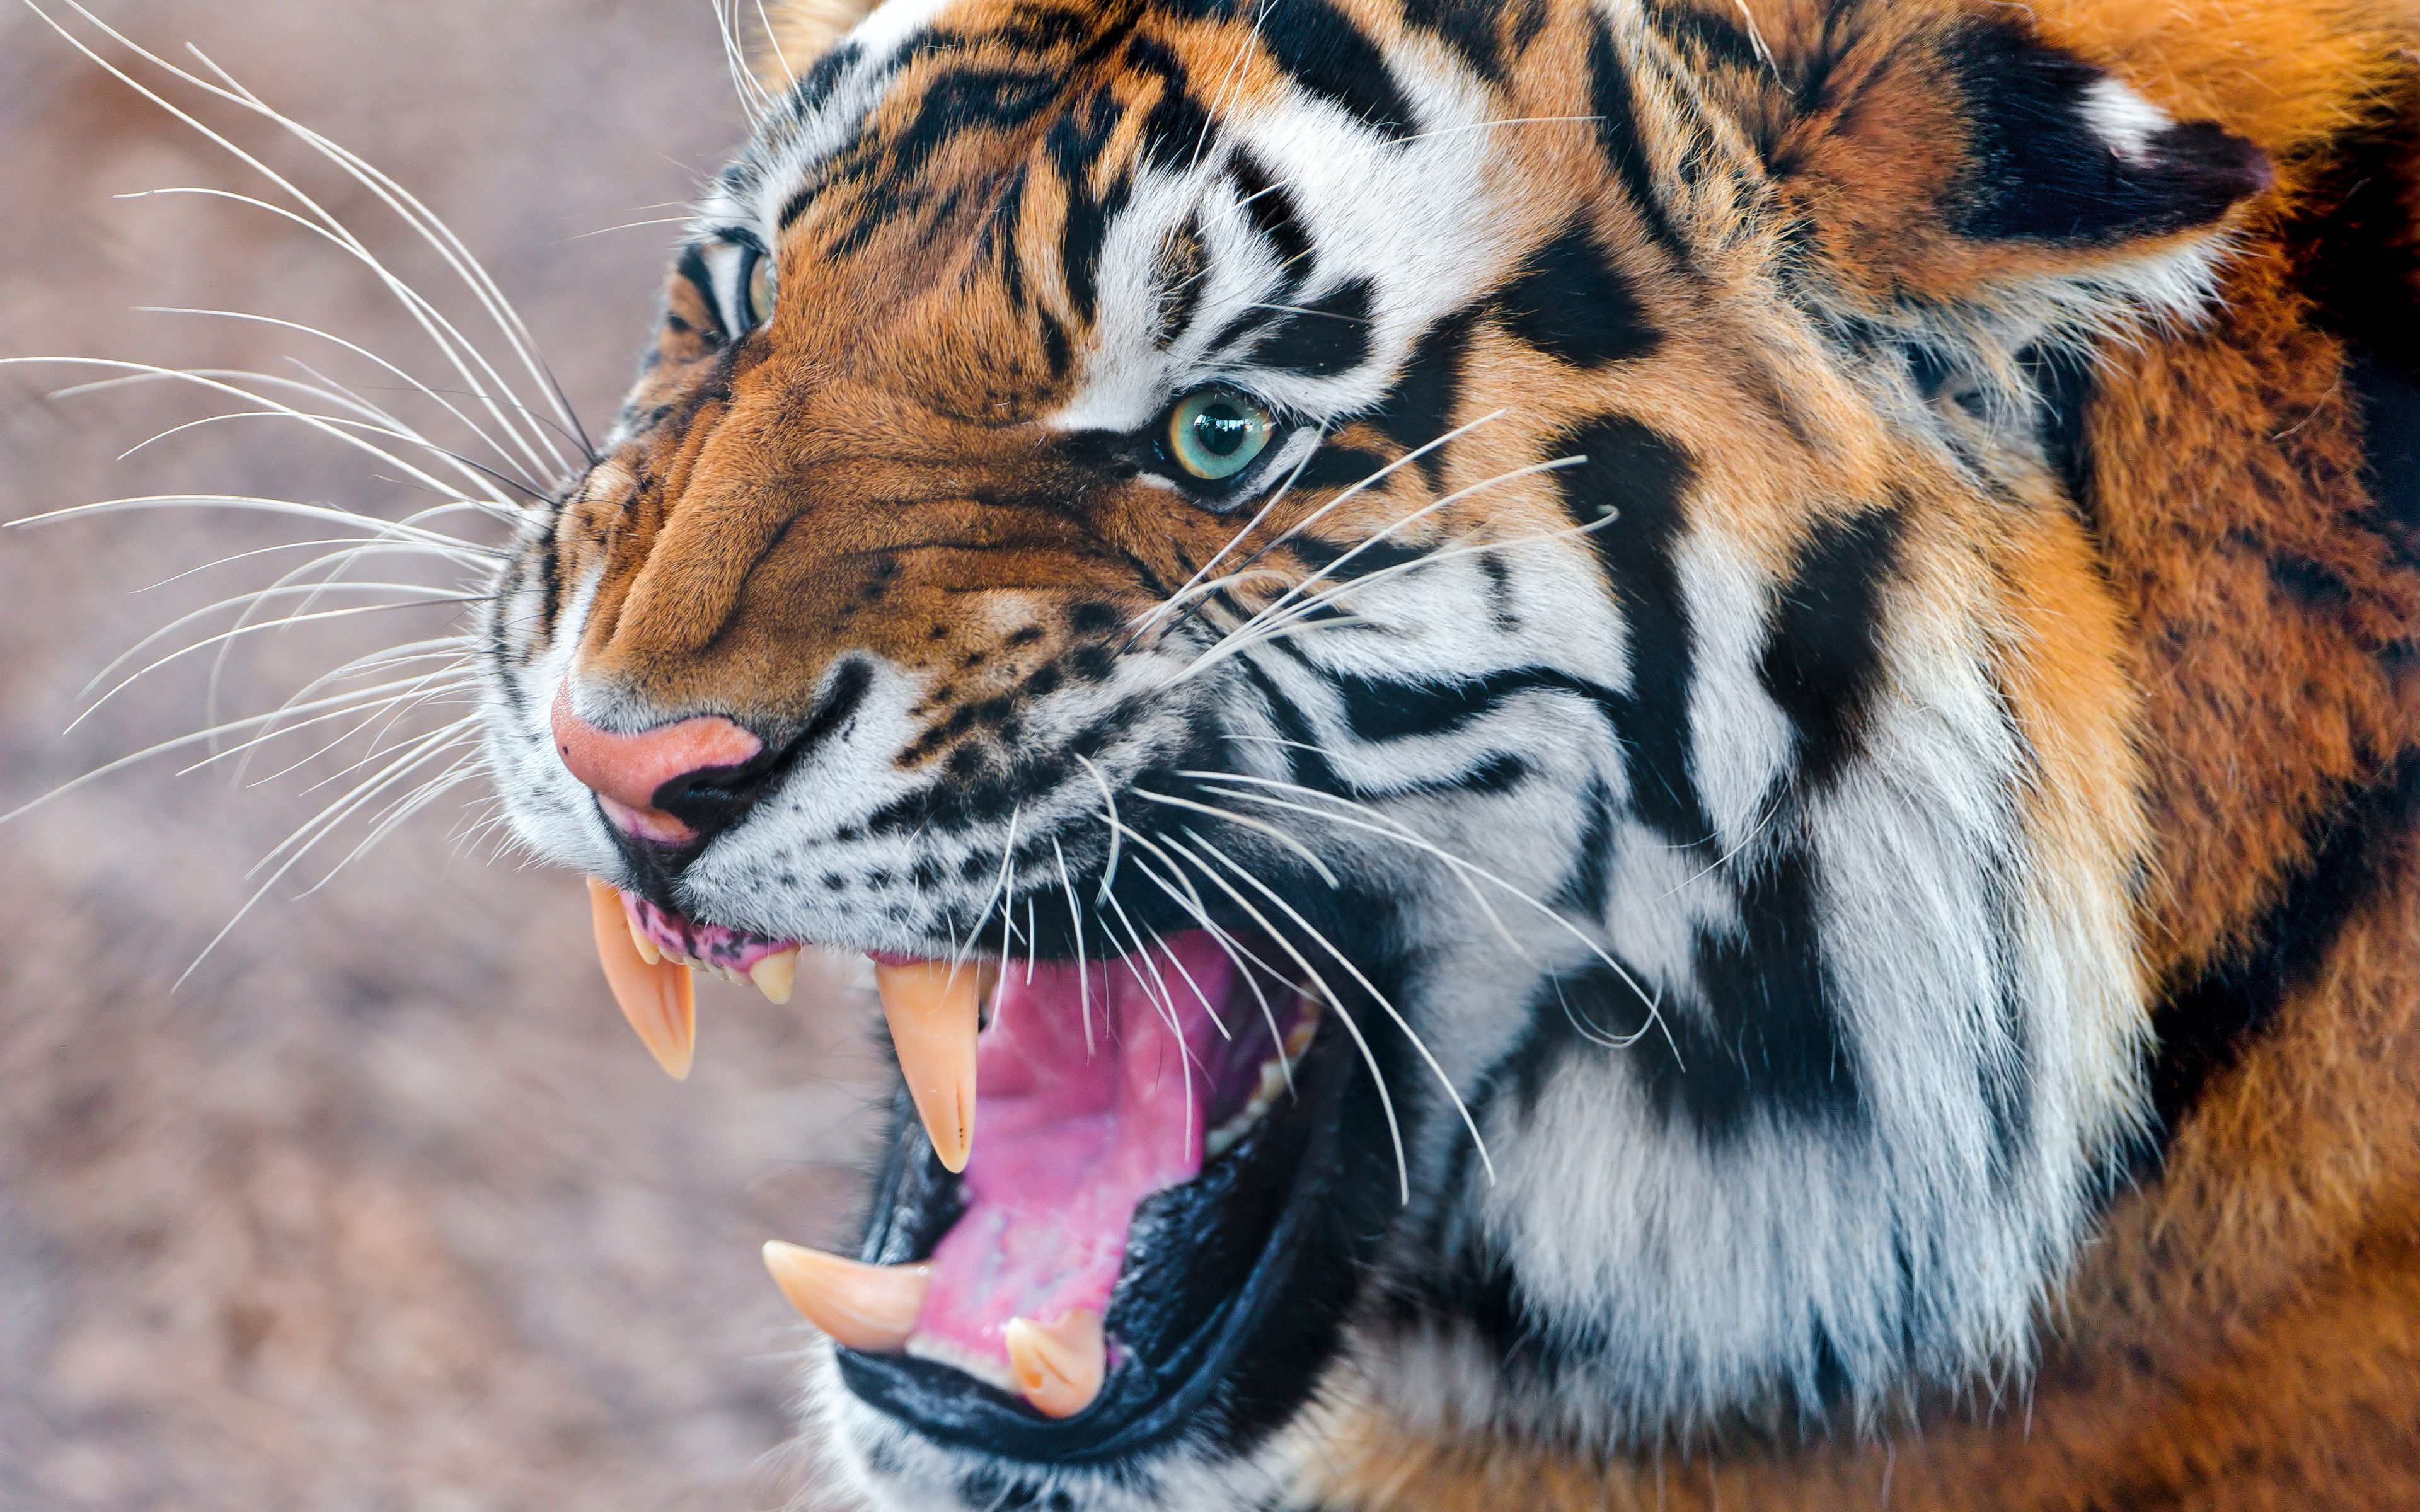 grin, tiger, animals, aggression, muzzle, anger images